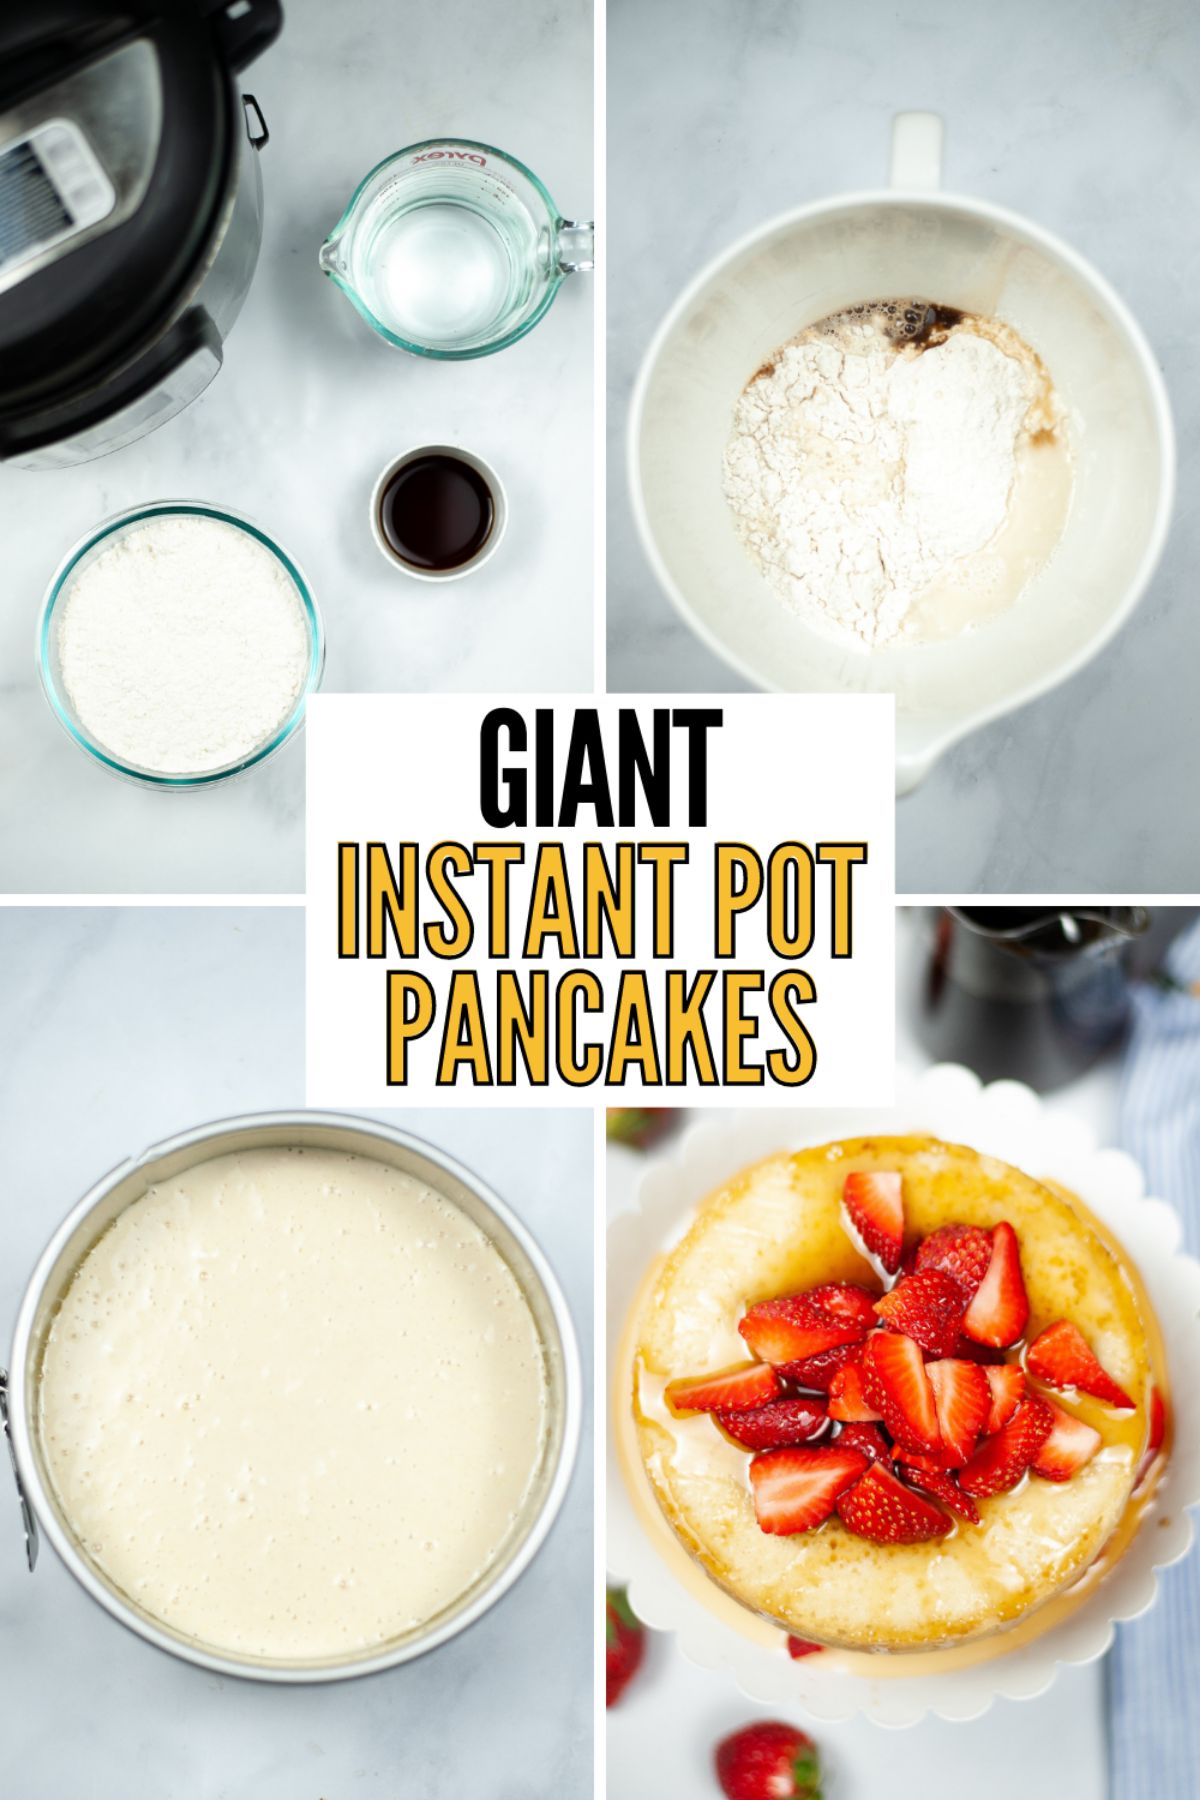 These Giant Instant Pot Pancakes cook up in minutes and are perfect for a weekend breakfast or brunch. Customize with your favorite toppings! #instantpot #pressurecooker #instatntpotpancakes #japanesesoufflepancakes #breakfast via @wondermomwannab